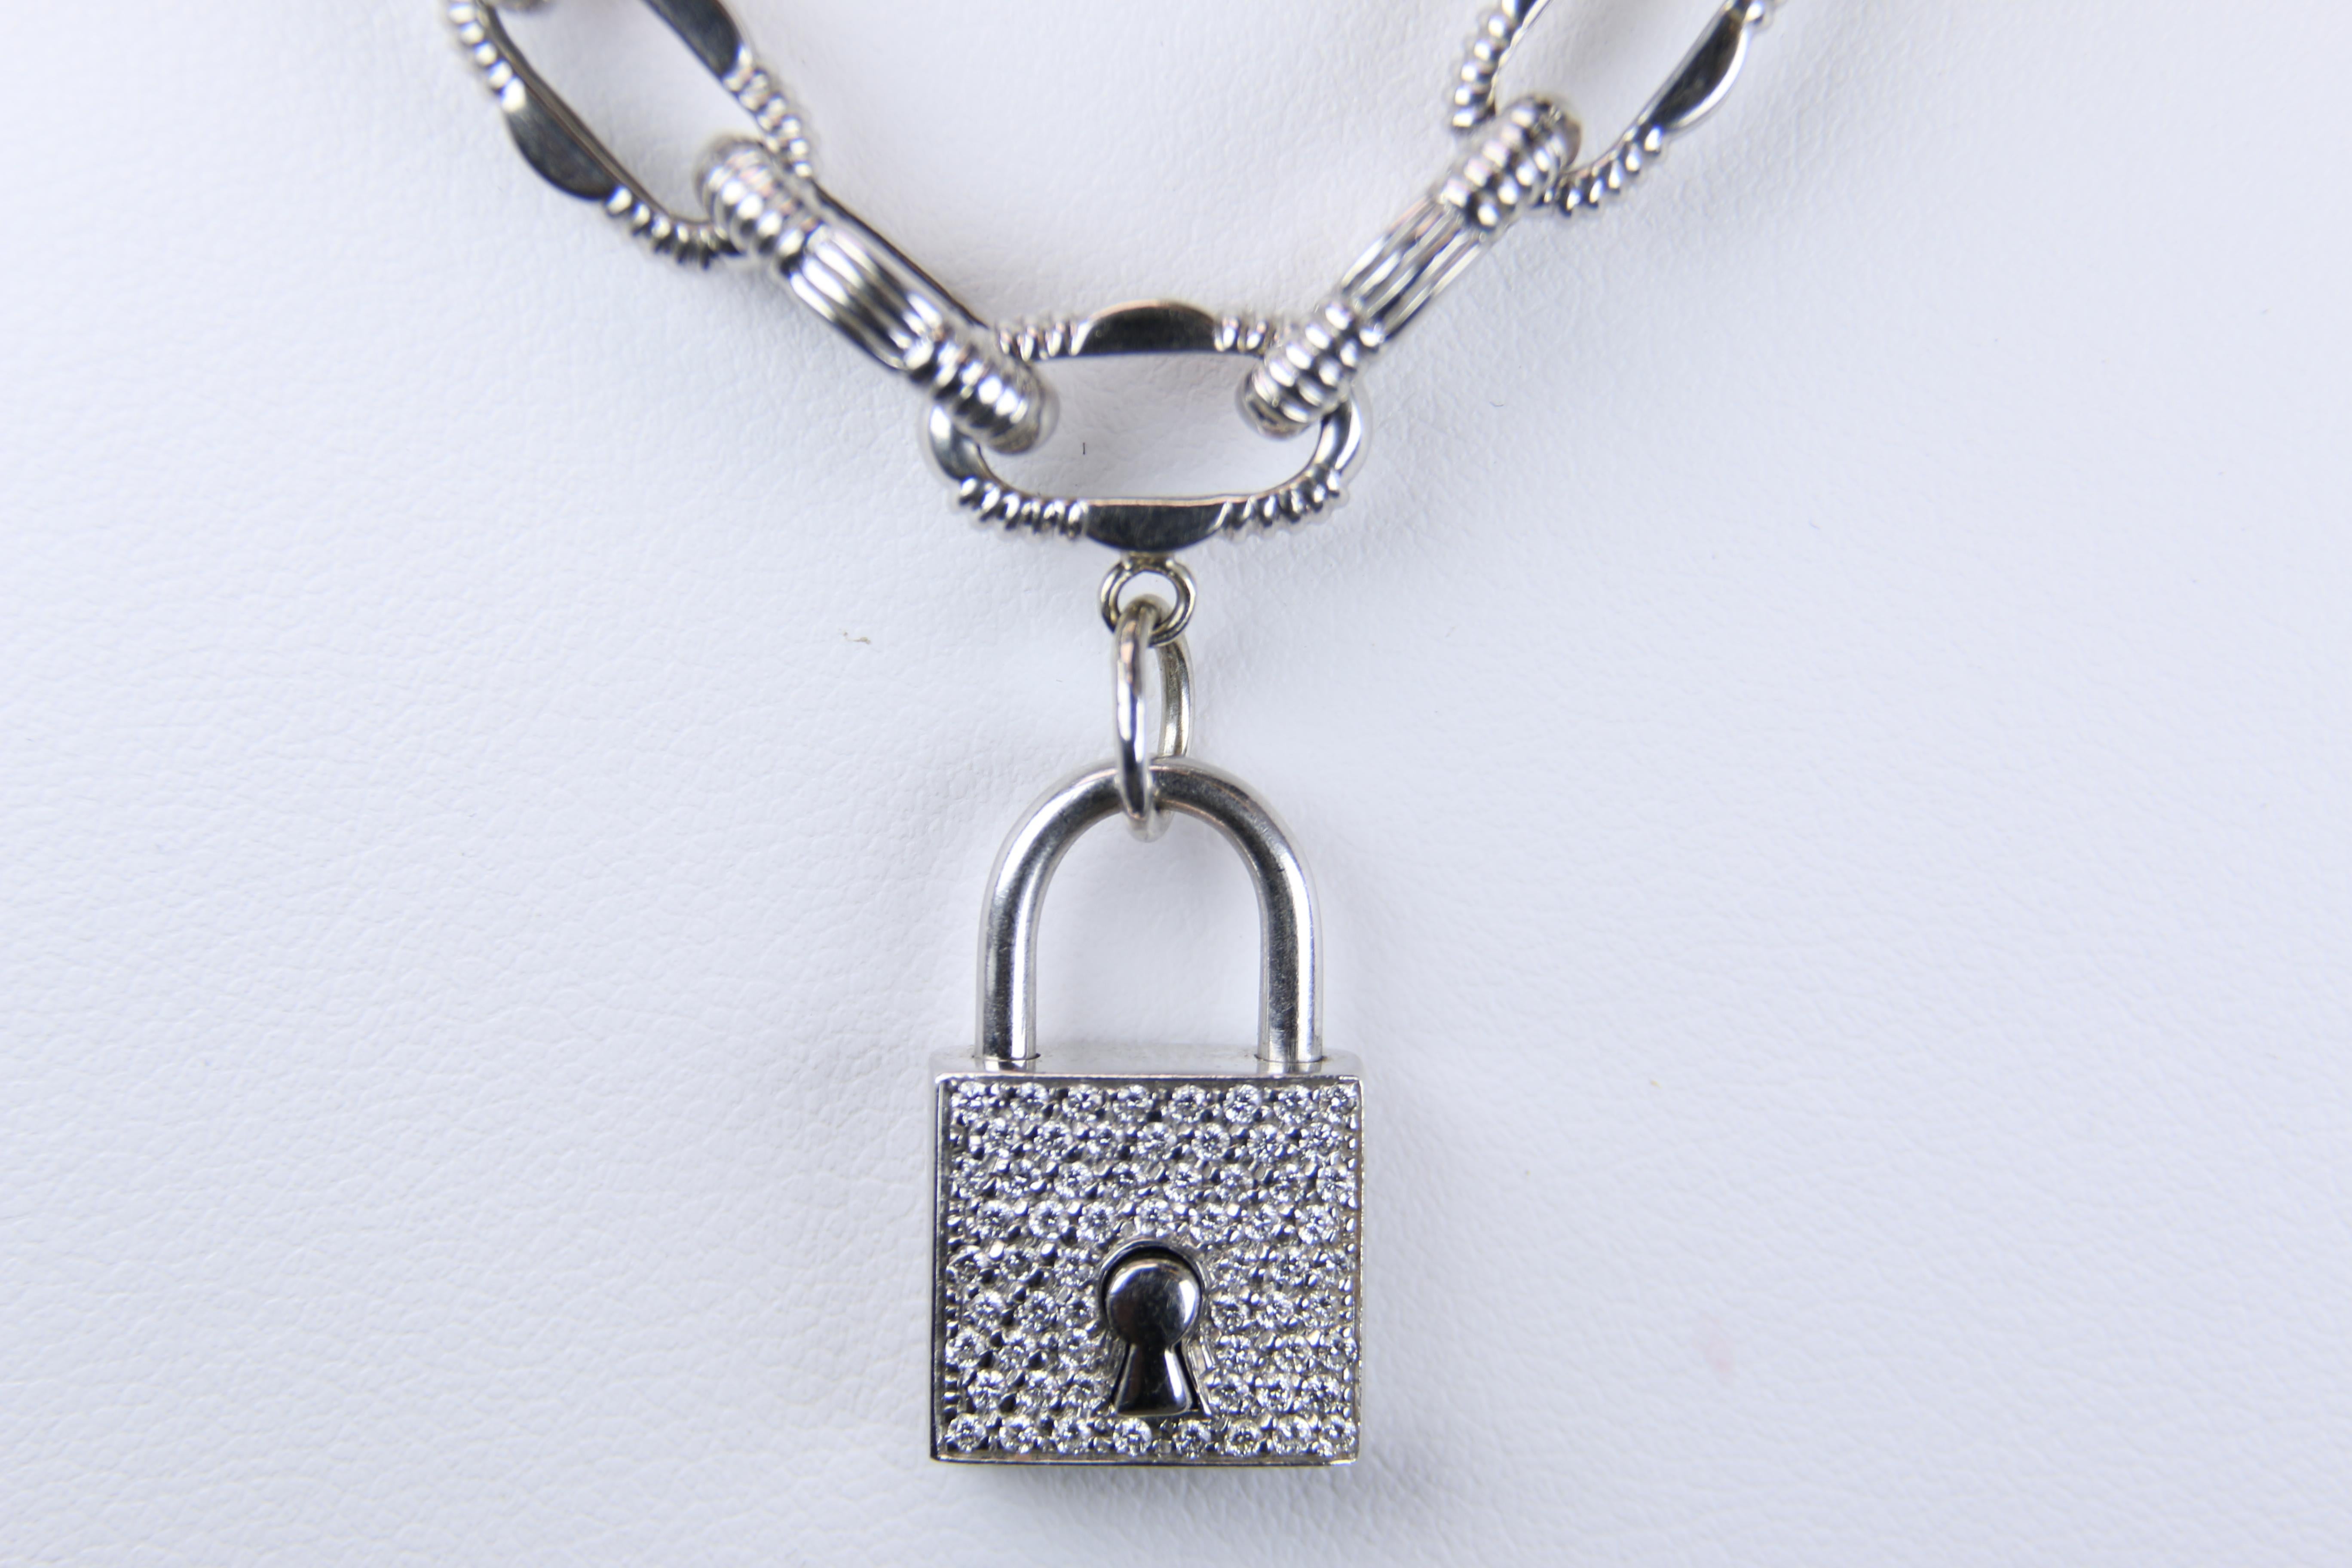 Roberto Coin 18K White Gold Diamond Padlock Link Necklace from the Appassionata Collection is 18 inches in length and consist of ornately designed open links. Each link is approximately 1/4 inch wide making a bold statement further accentuated by a